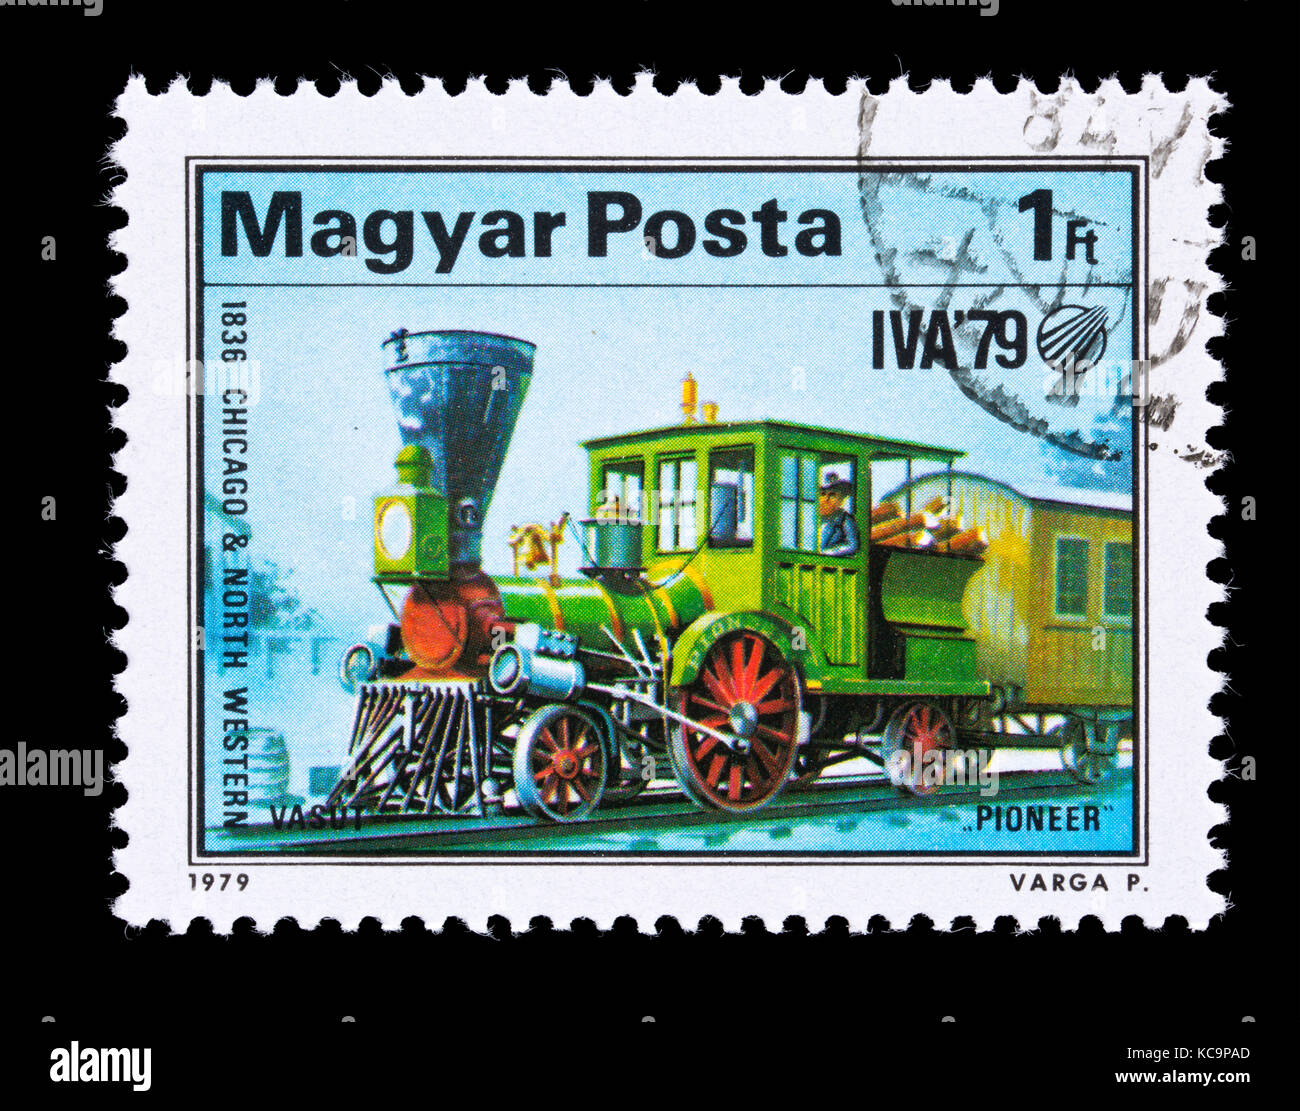 Postage stamp from Hungary depicting Pioneer, Chicago and Northwestern Railroad for the International Transportation Exhibition (IVA 79) in Hamburg Stock Photo